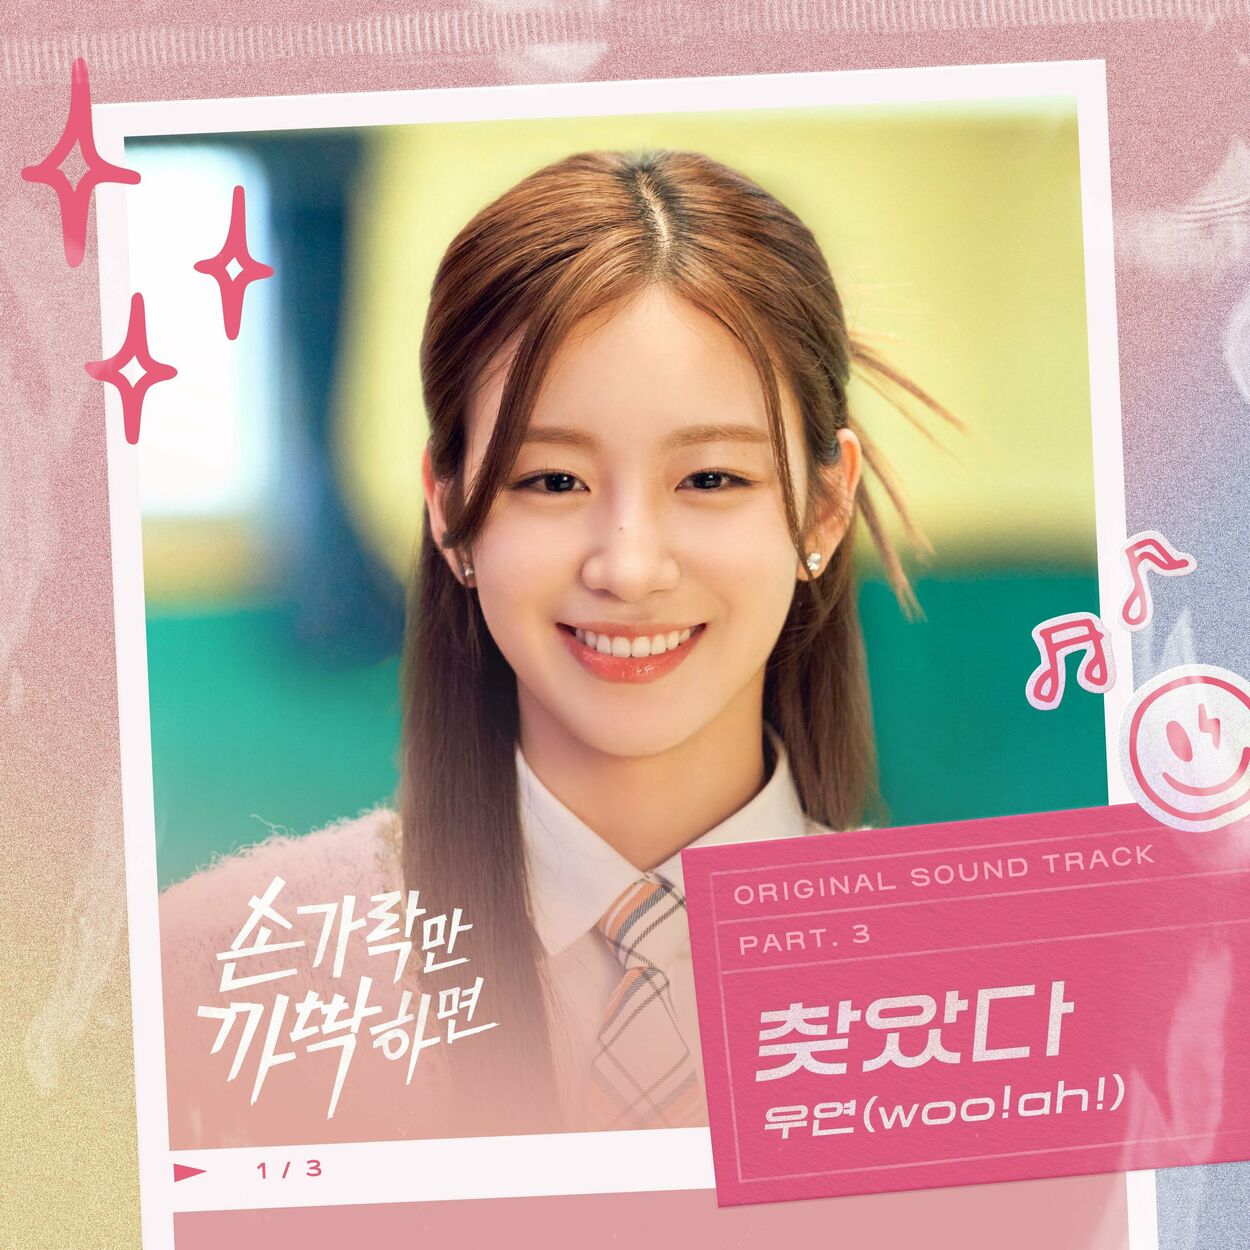 wooyeon – Snap and Spark OST Part.3